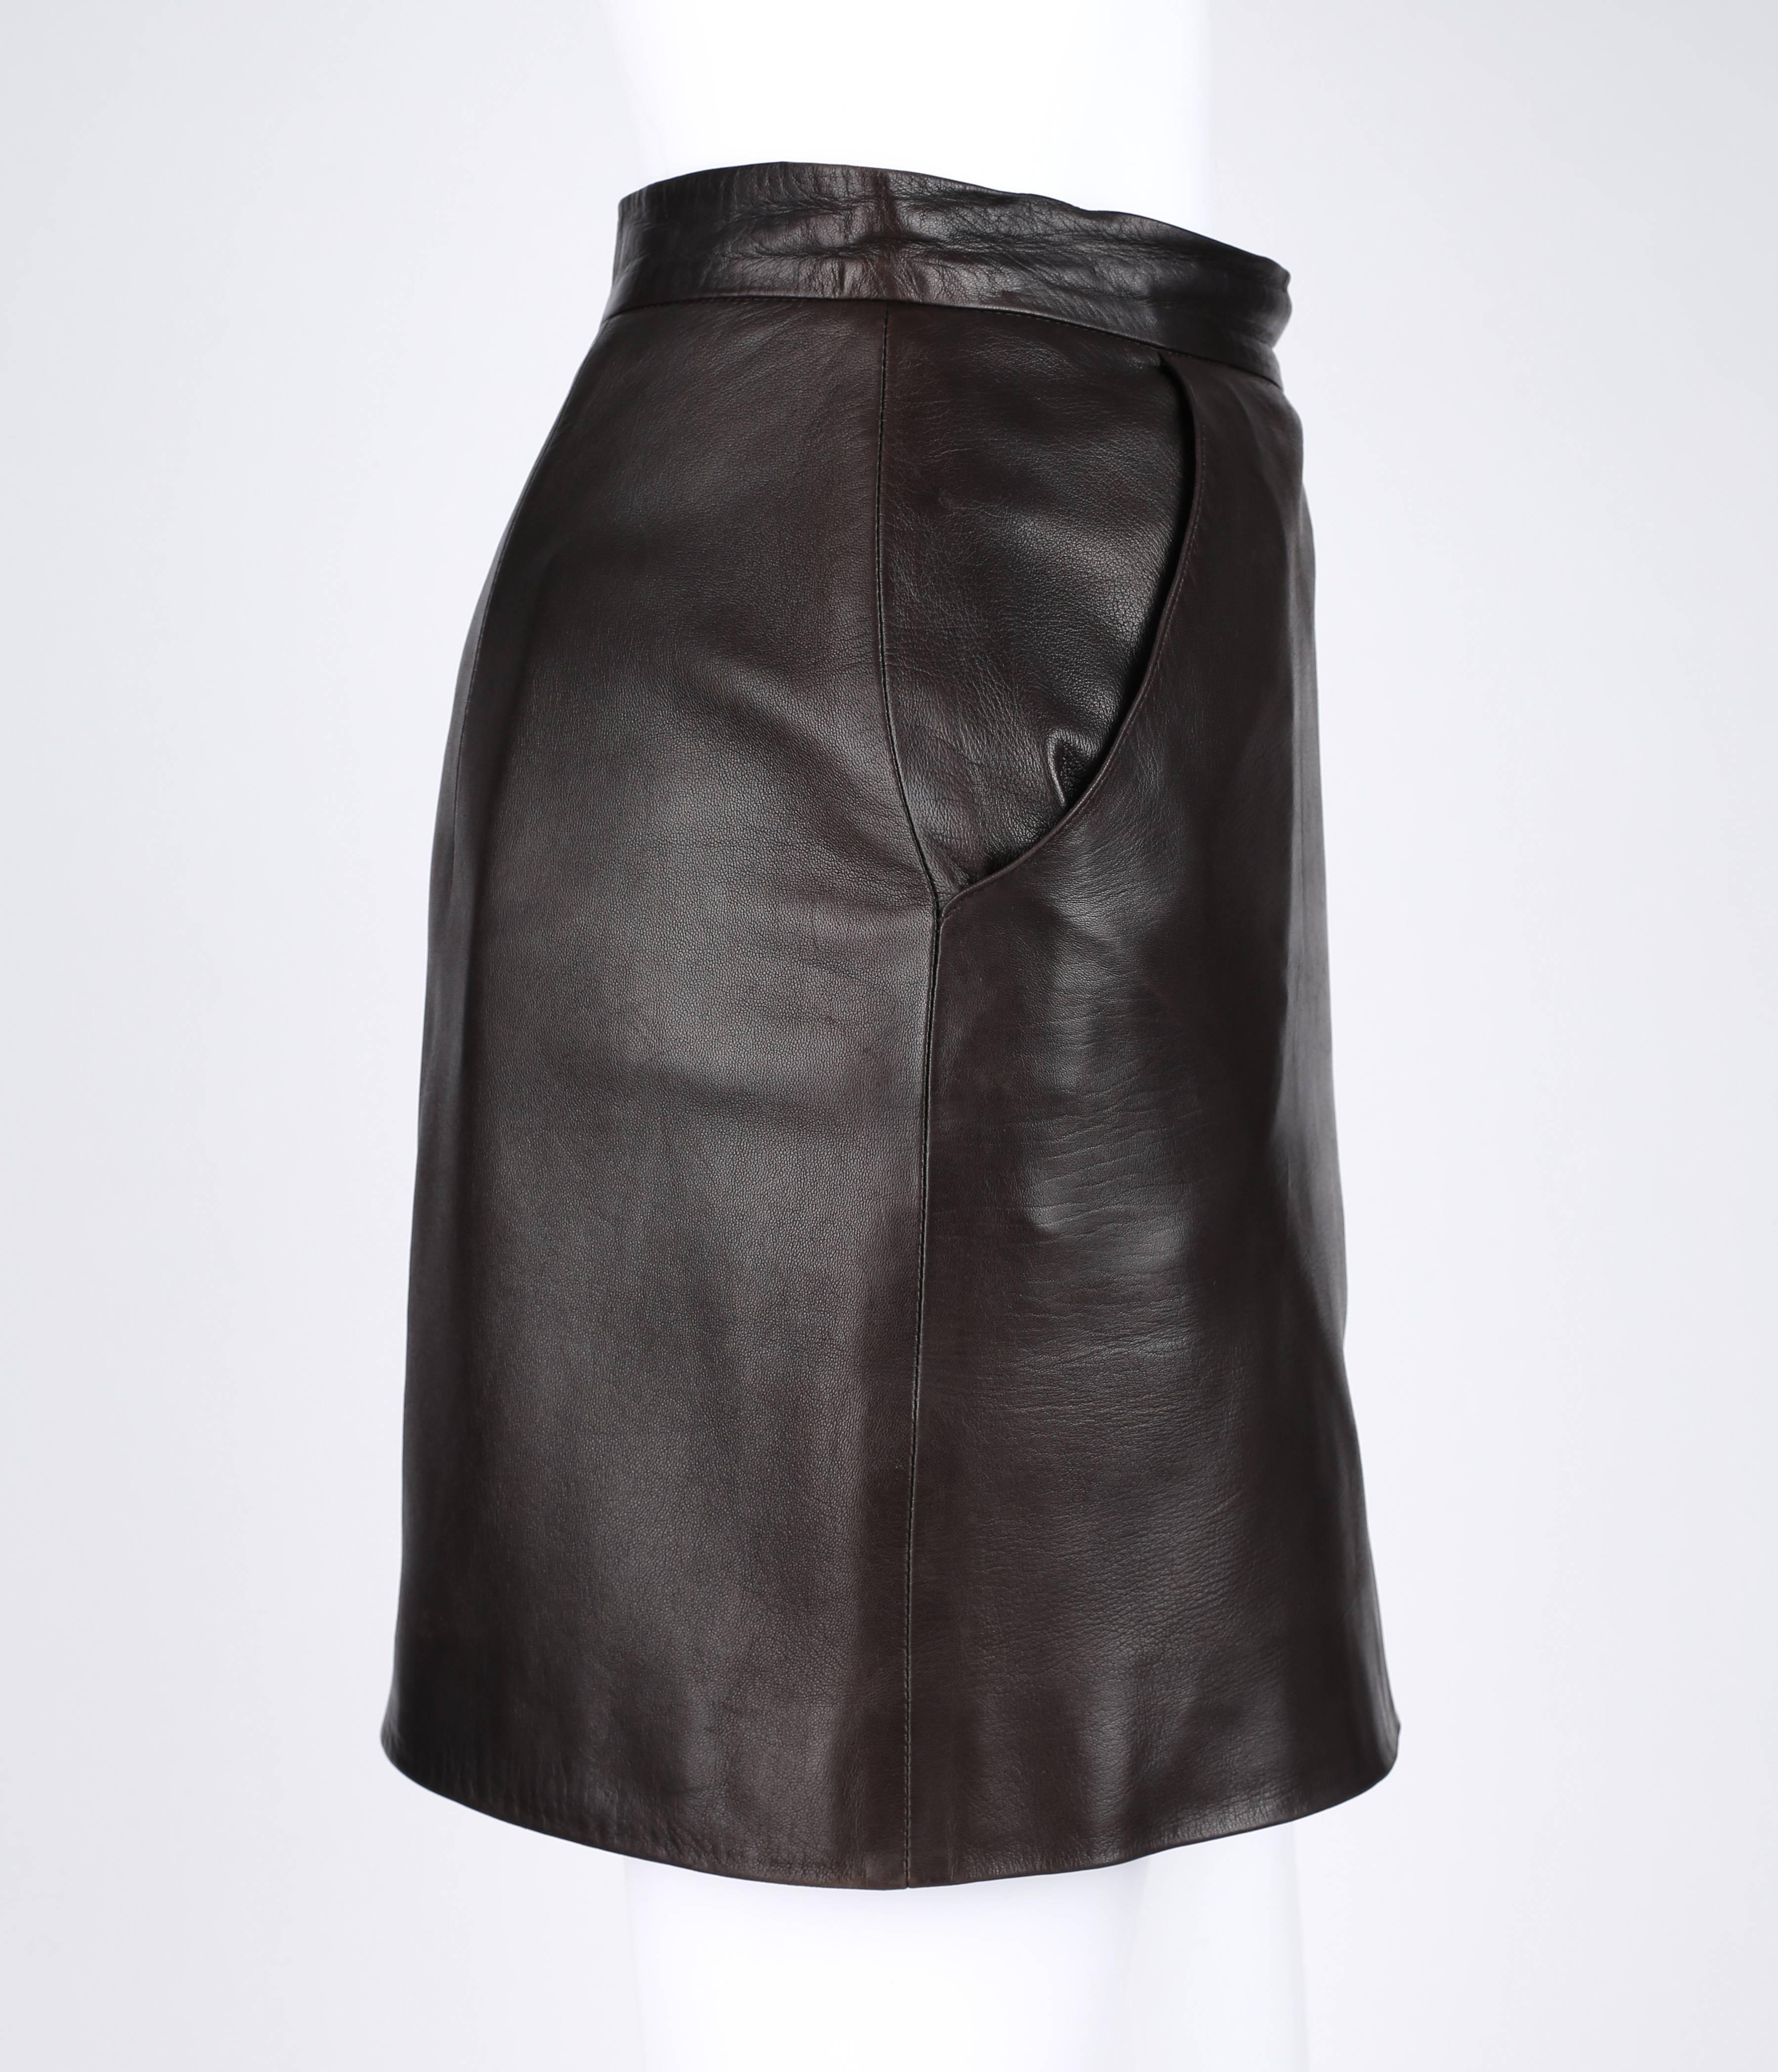 Givenchy Couture A/W 1997 designed by Alexander McQueen from the "Lady Leopard" collection. Dark brown genuine leather mini skirt. Two front angled hip pockets. Side left front slit. Back darts. Side invisible zipper with single button and